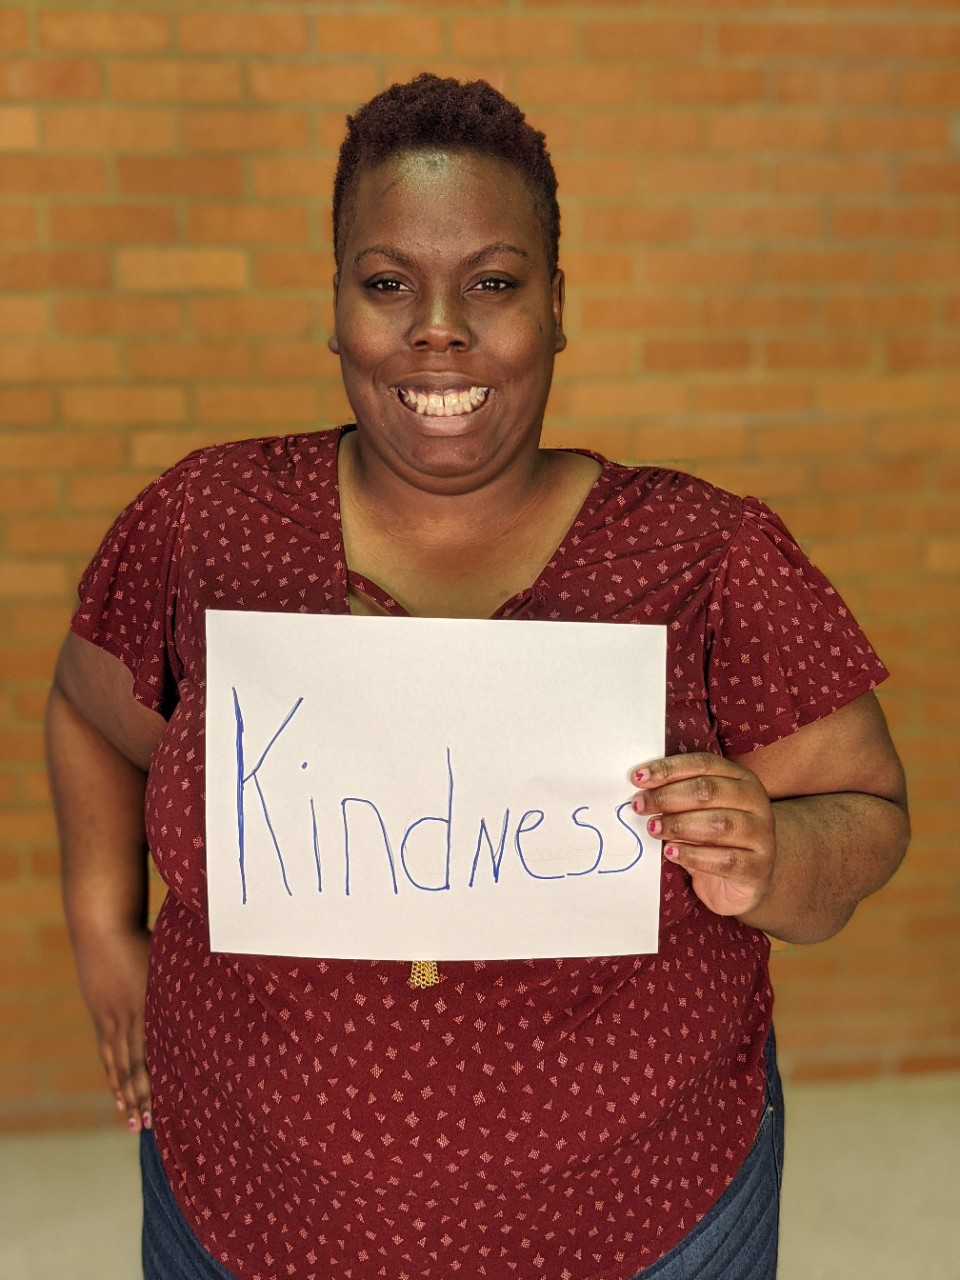 Woman holding a sign that says Kindness